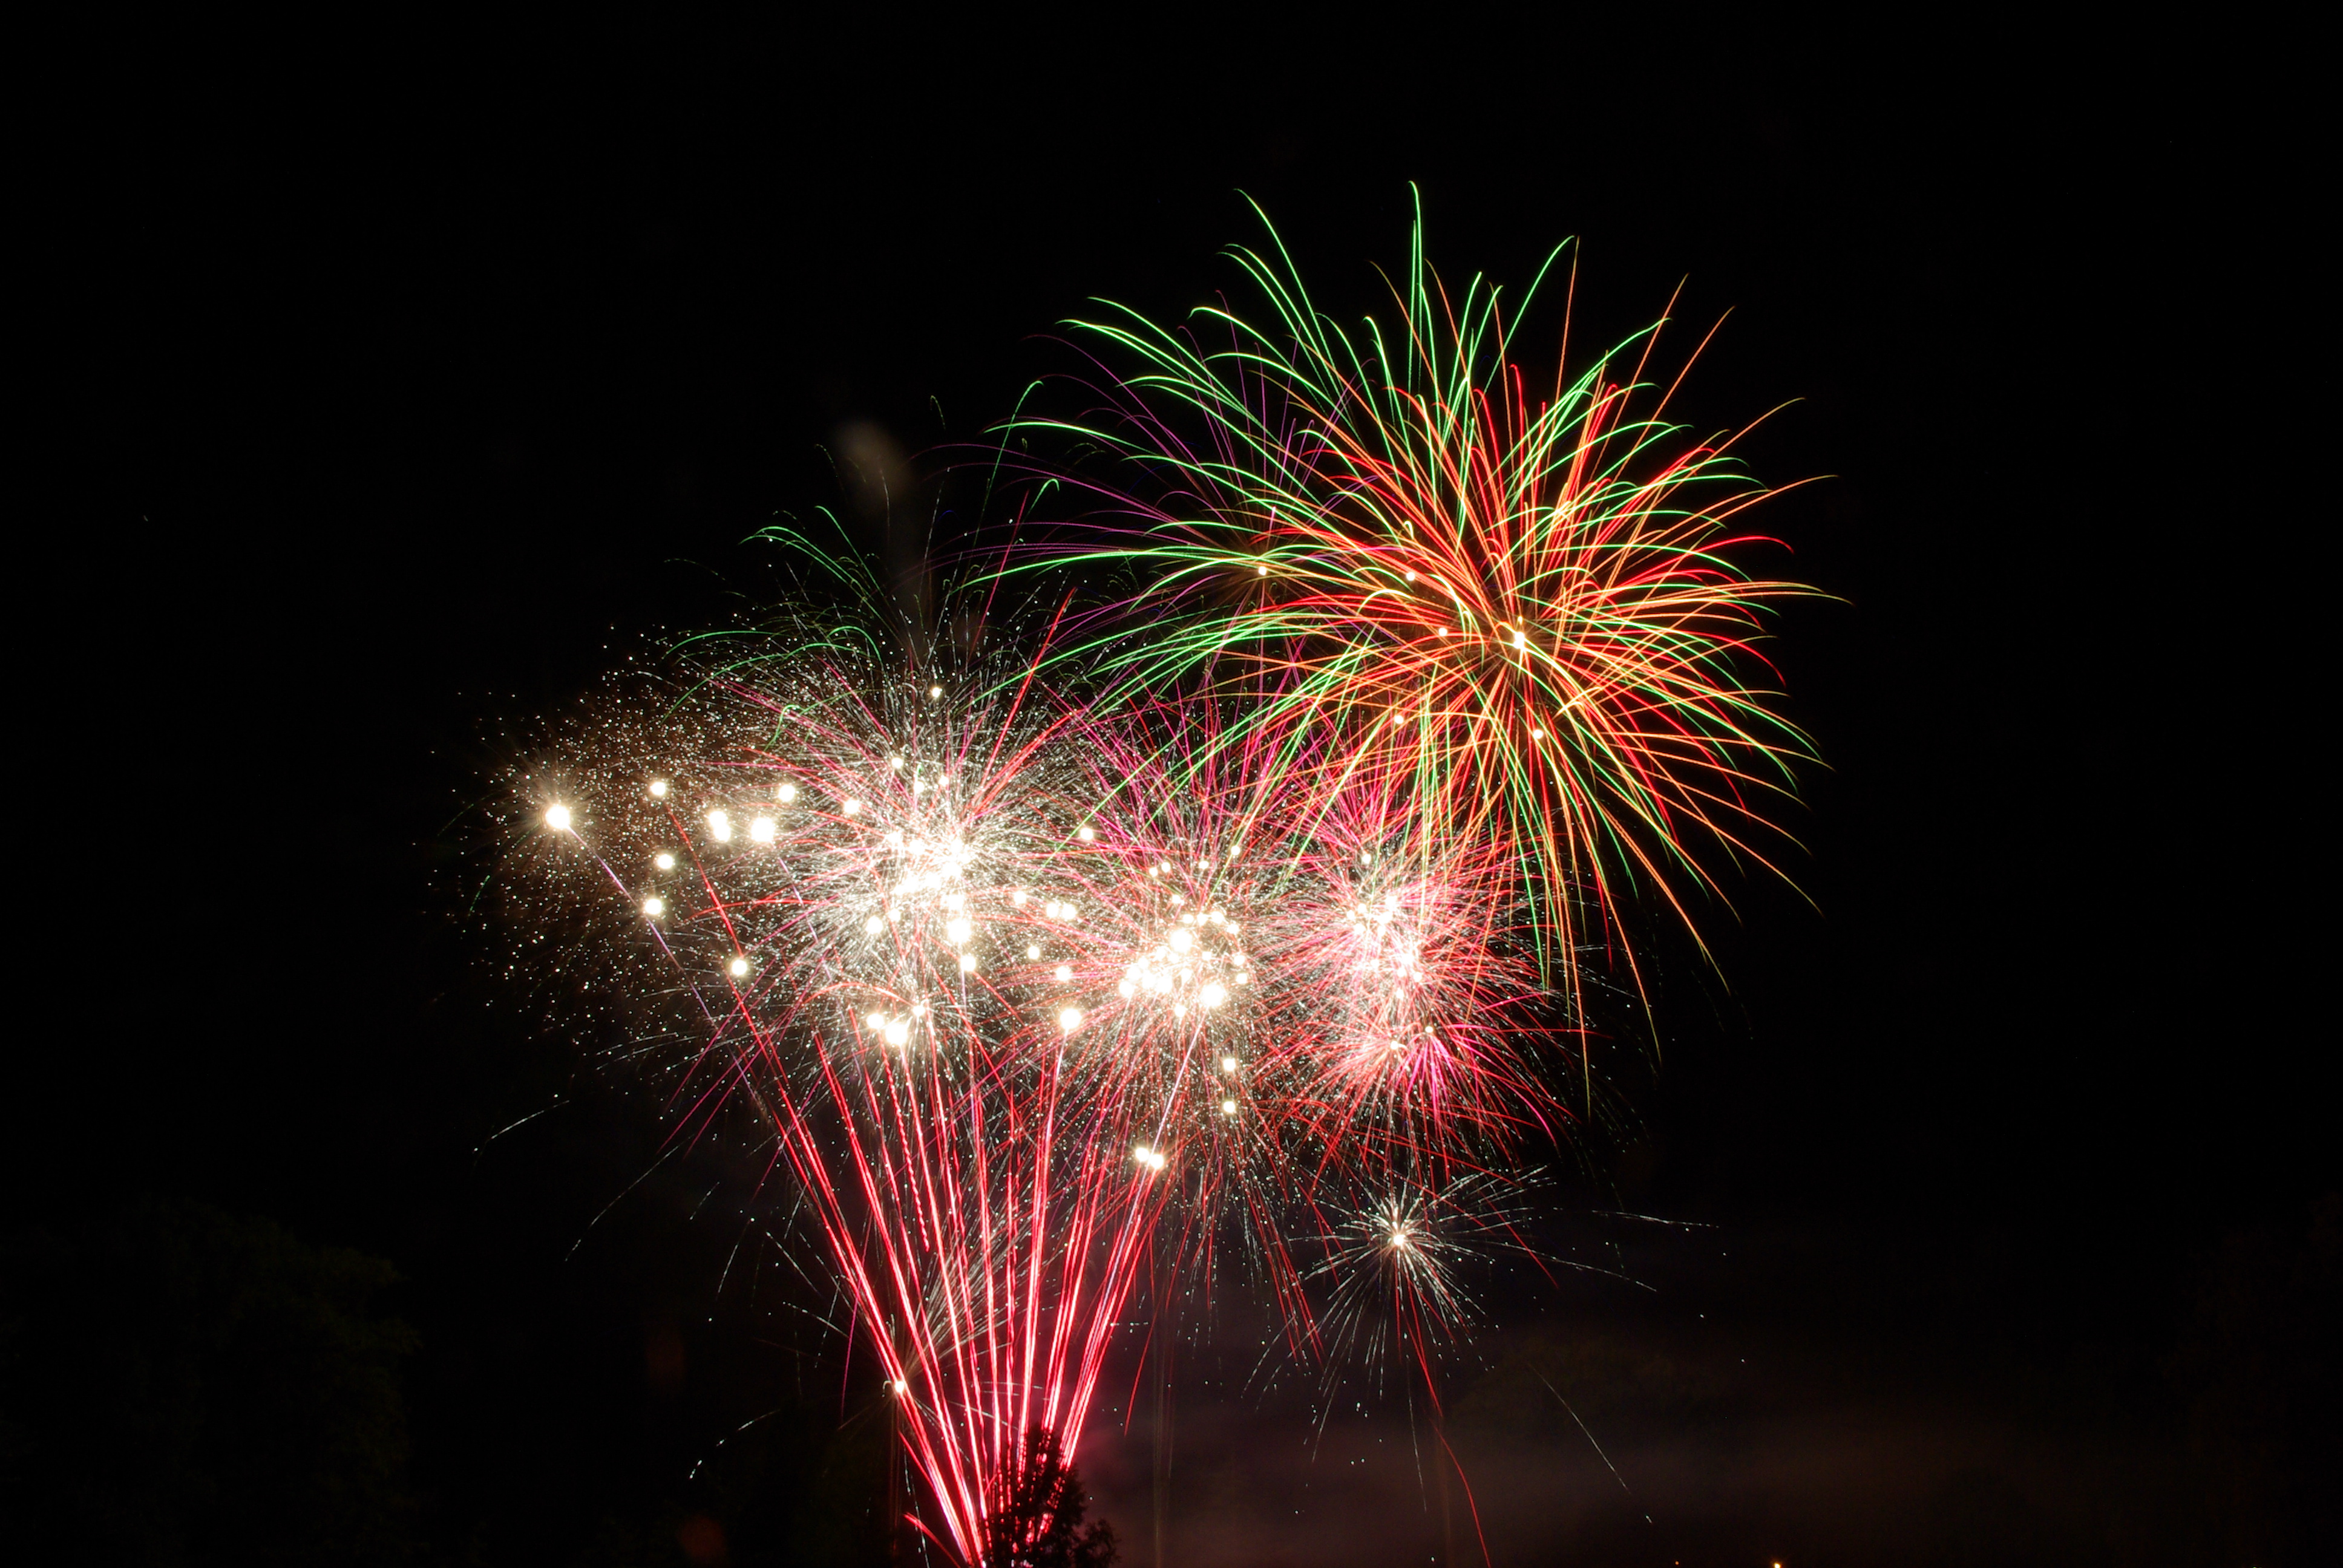 motley, firework, salute, holidays, sparks, multicolored, holiday, fireworks QHD